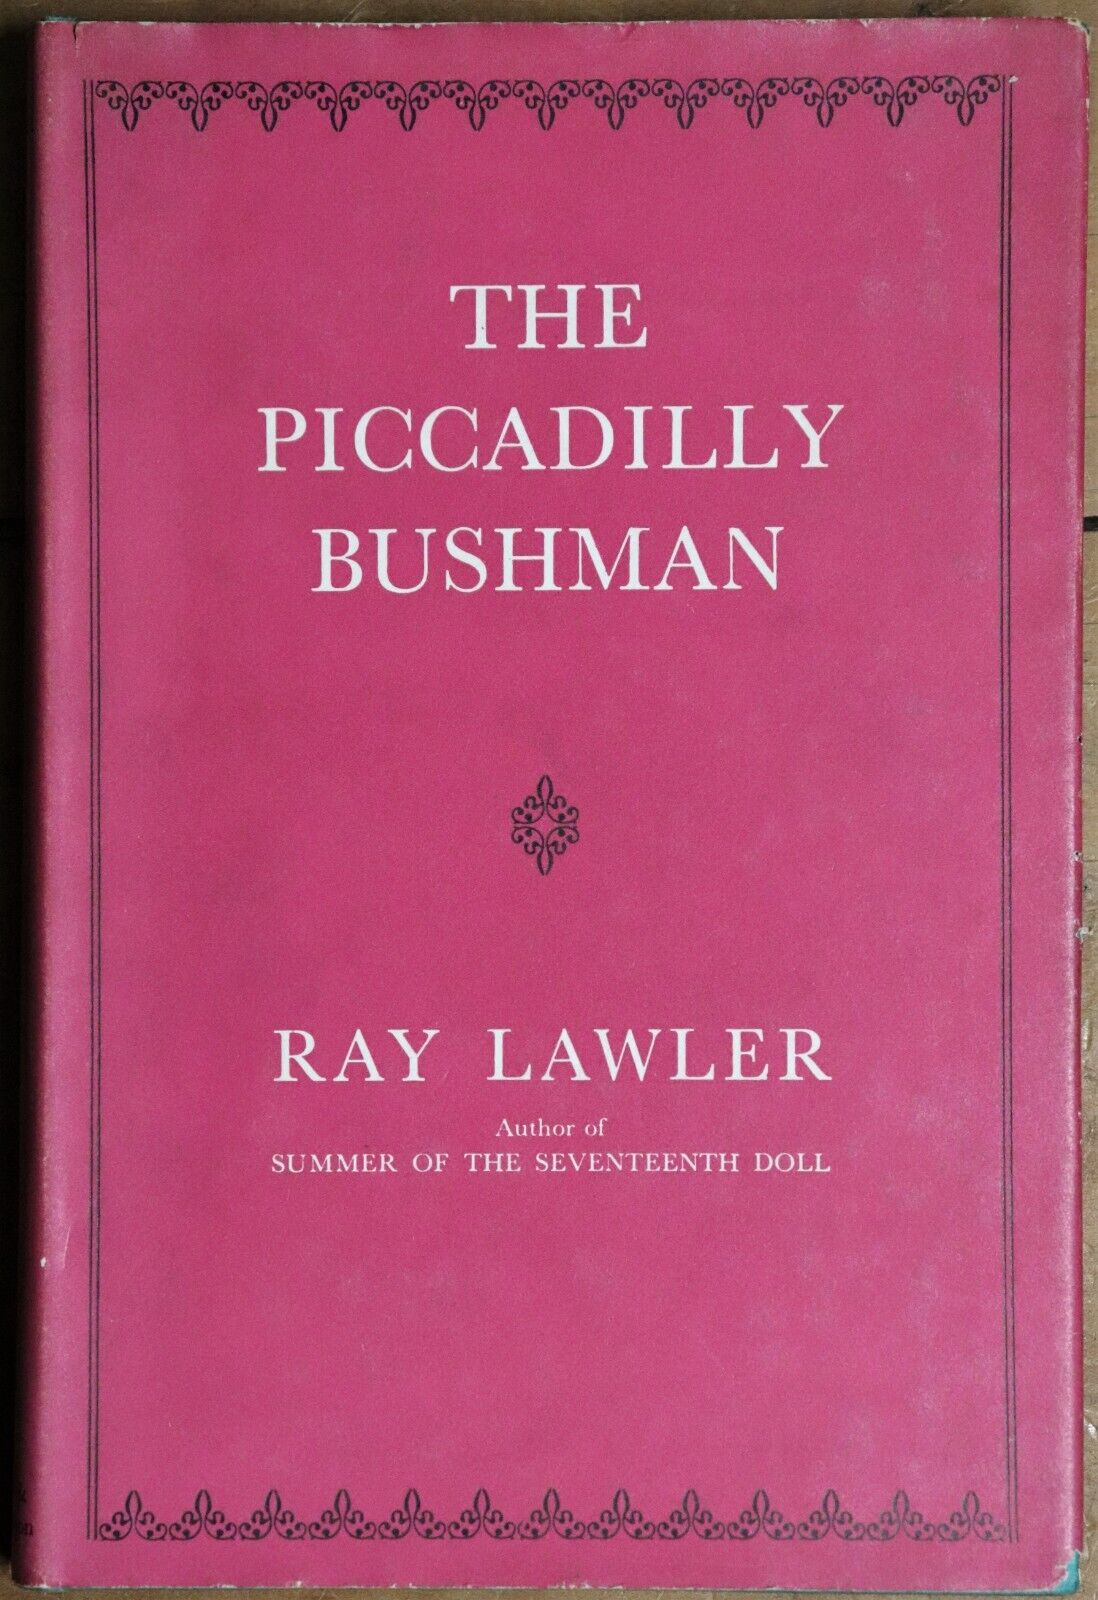 The Piccadilly Bushman by Ray Lawler - 1961 - Australian Literature Book